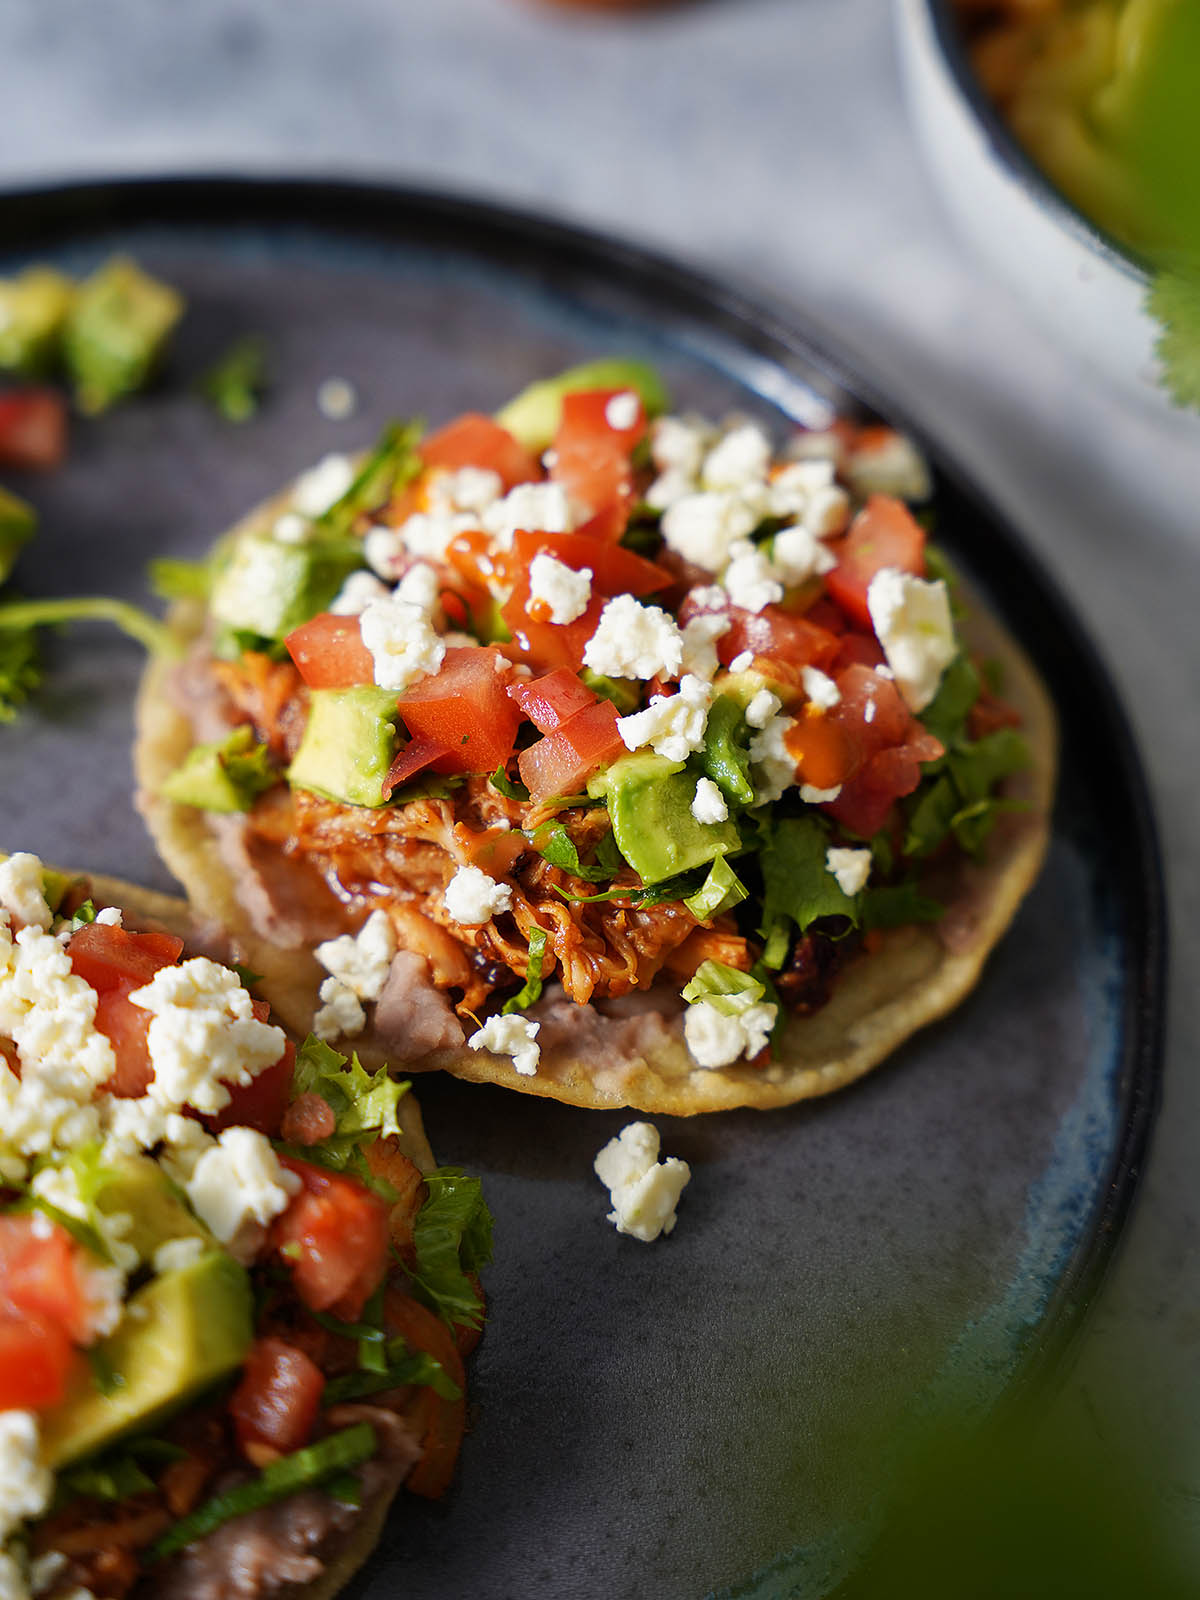 Two chicken tostadas on a plate topped with beans, shredded chicken, tomatoes, avocados and lettuce.